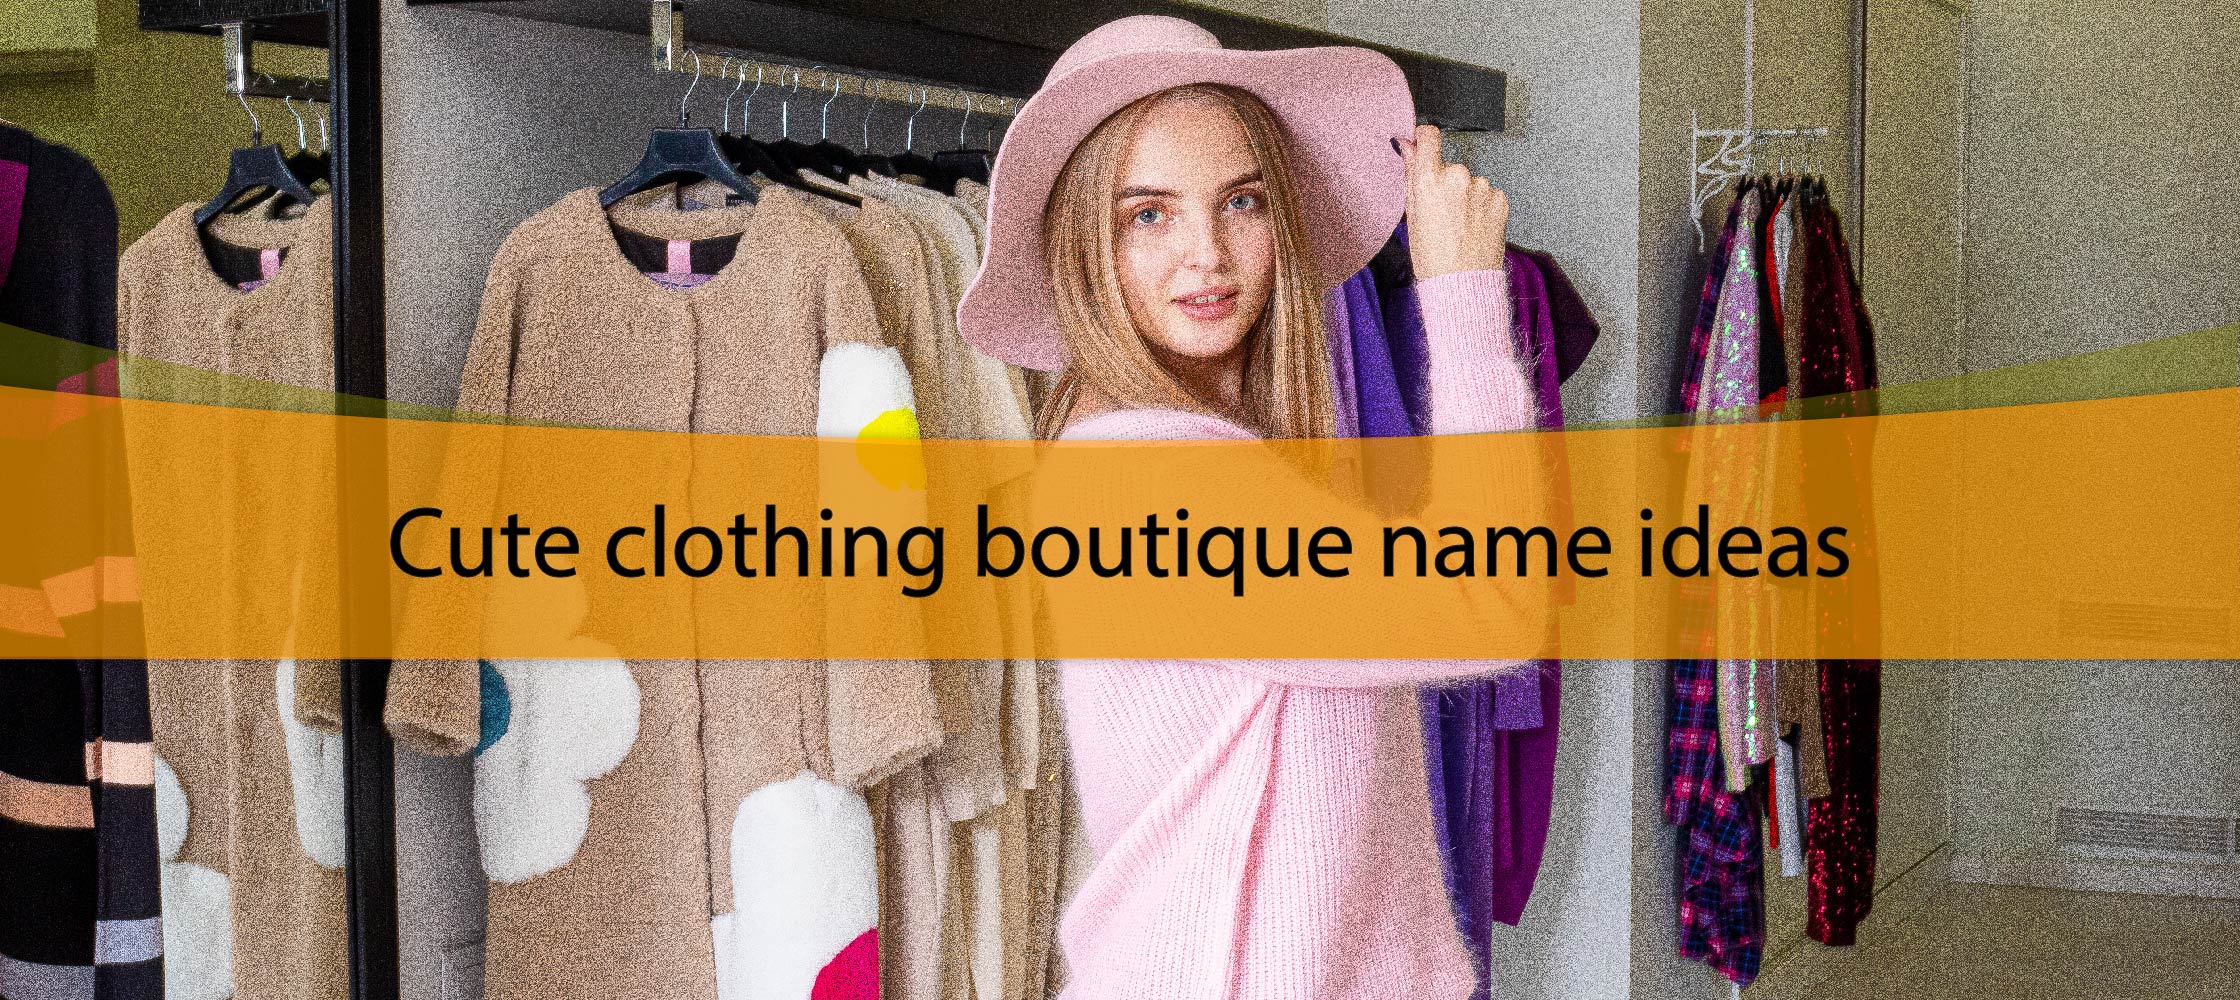 Cute clothing boutique name ideas